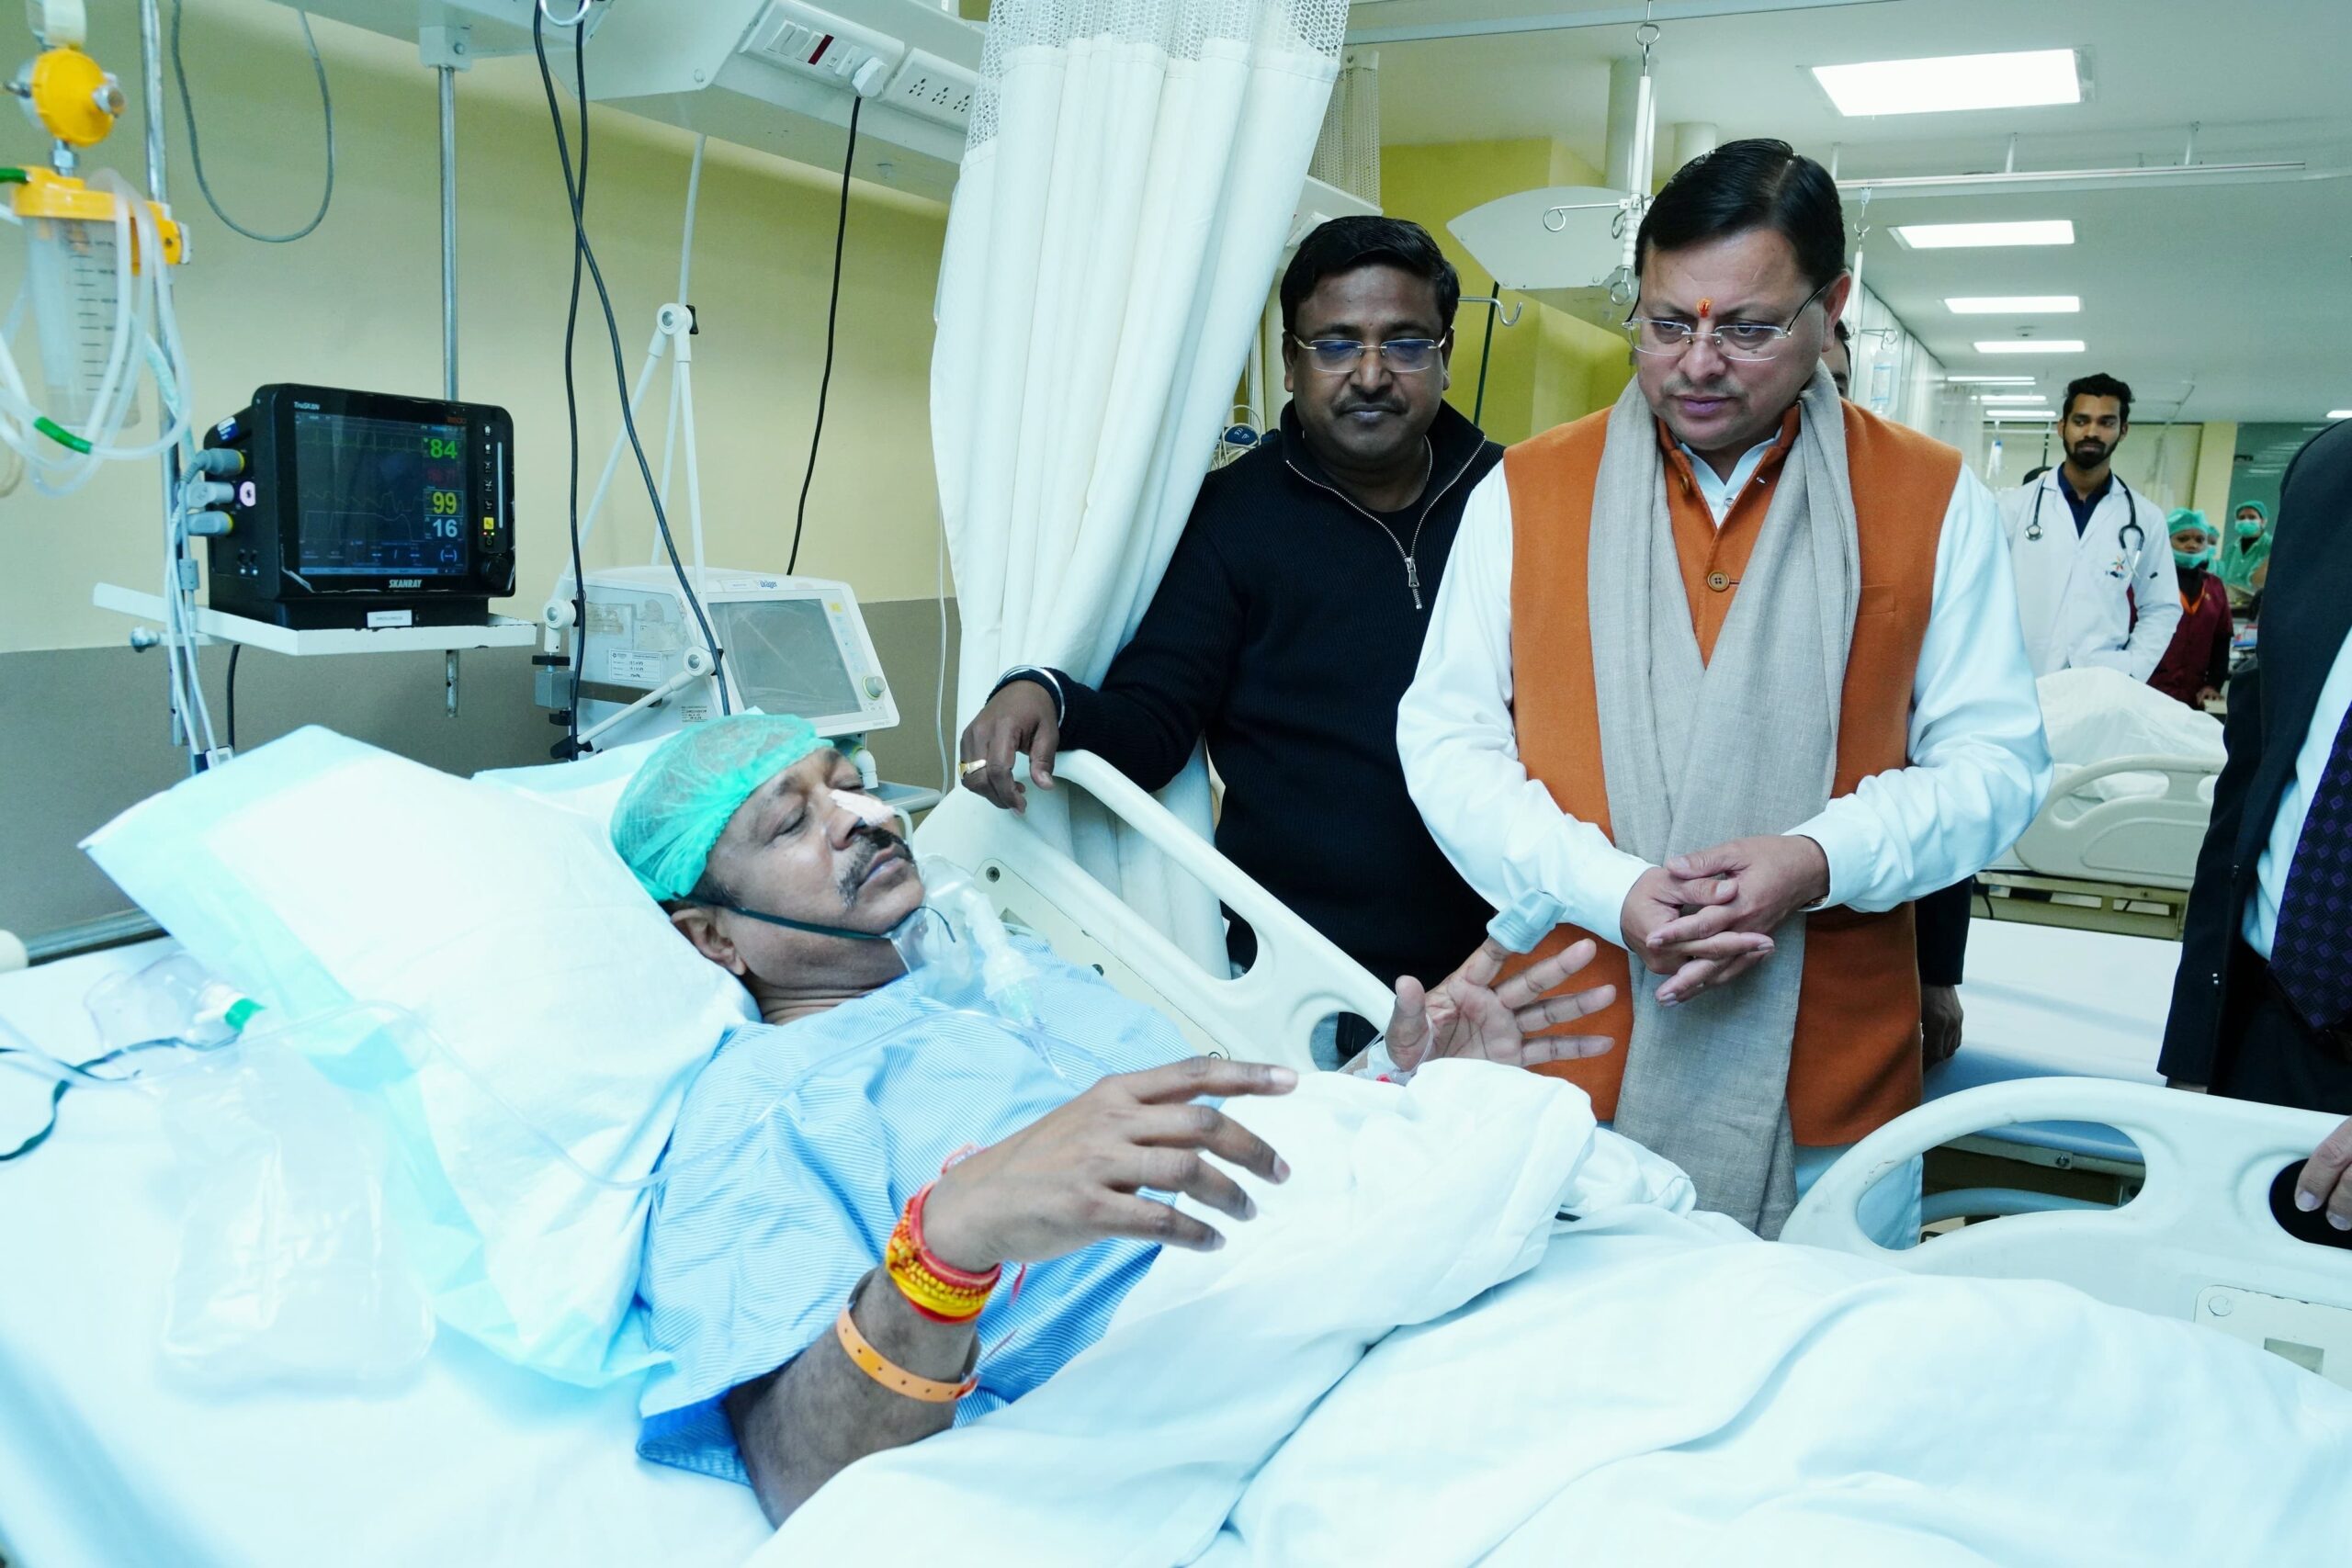 CM inquires about the condition of Excise Secretary Harichand Semwal admitted in the hospital.